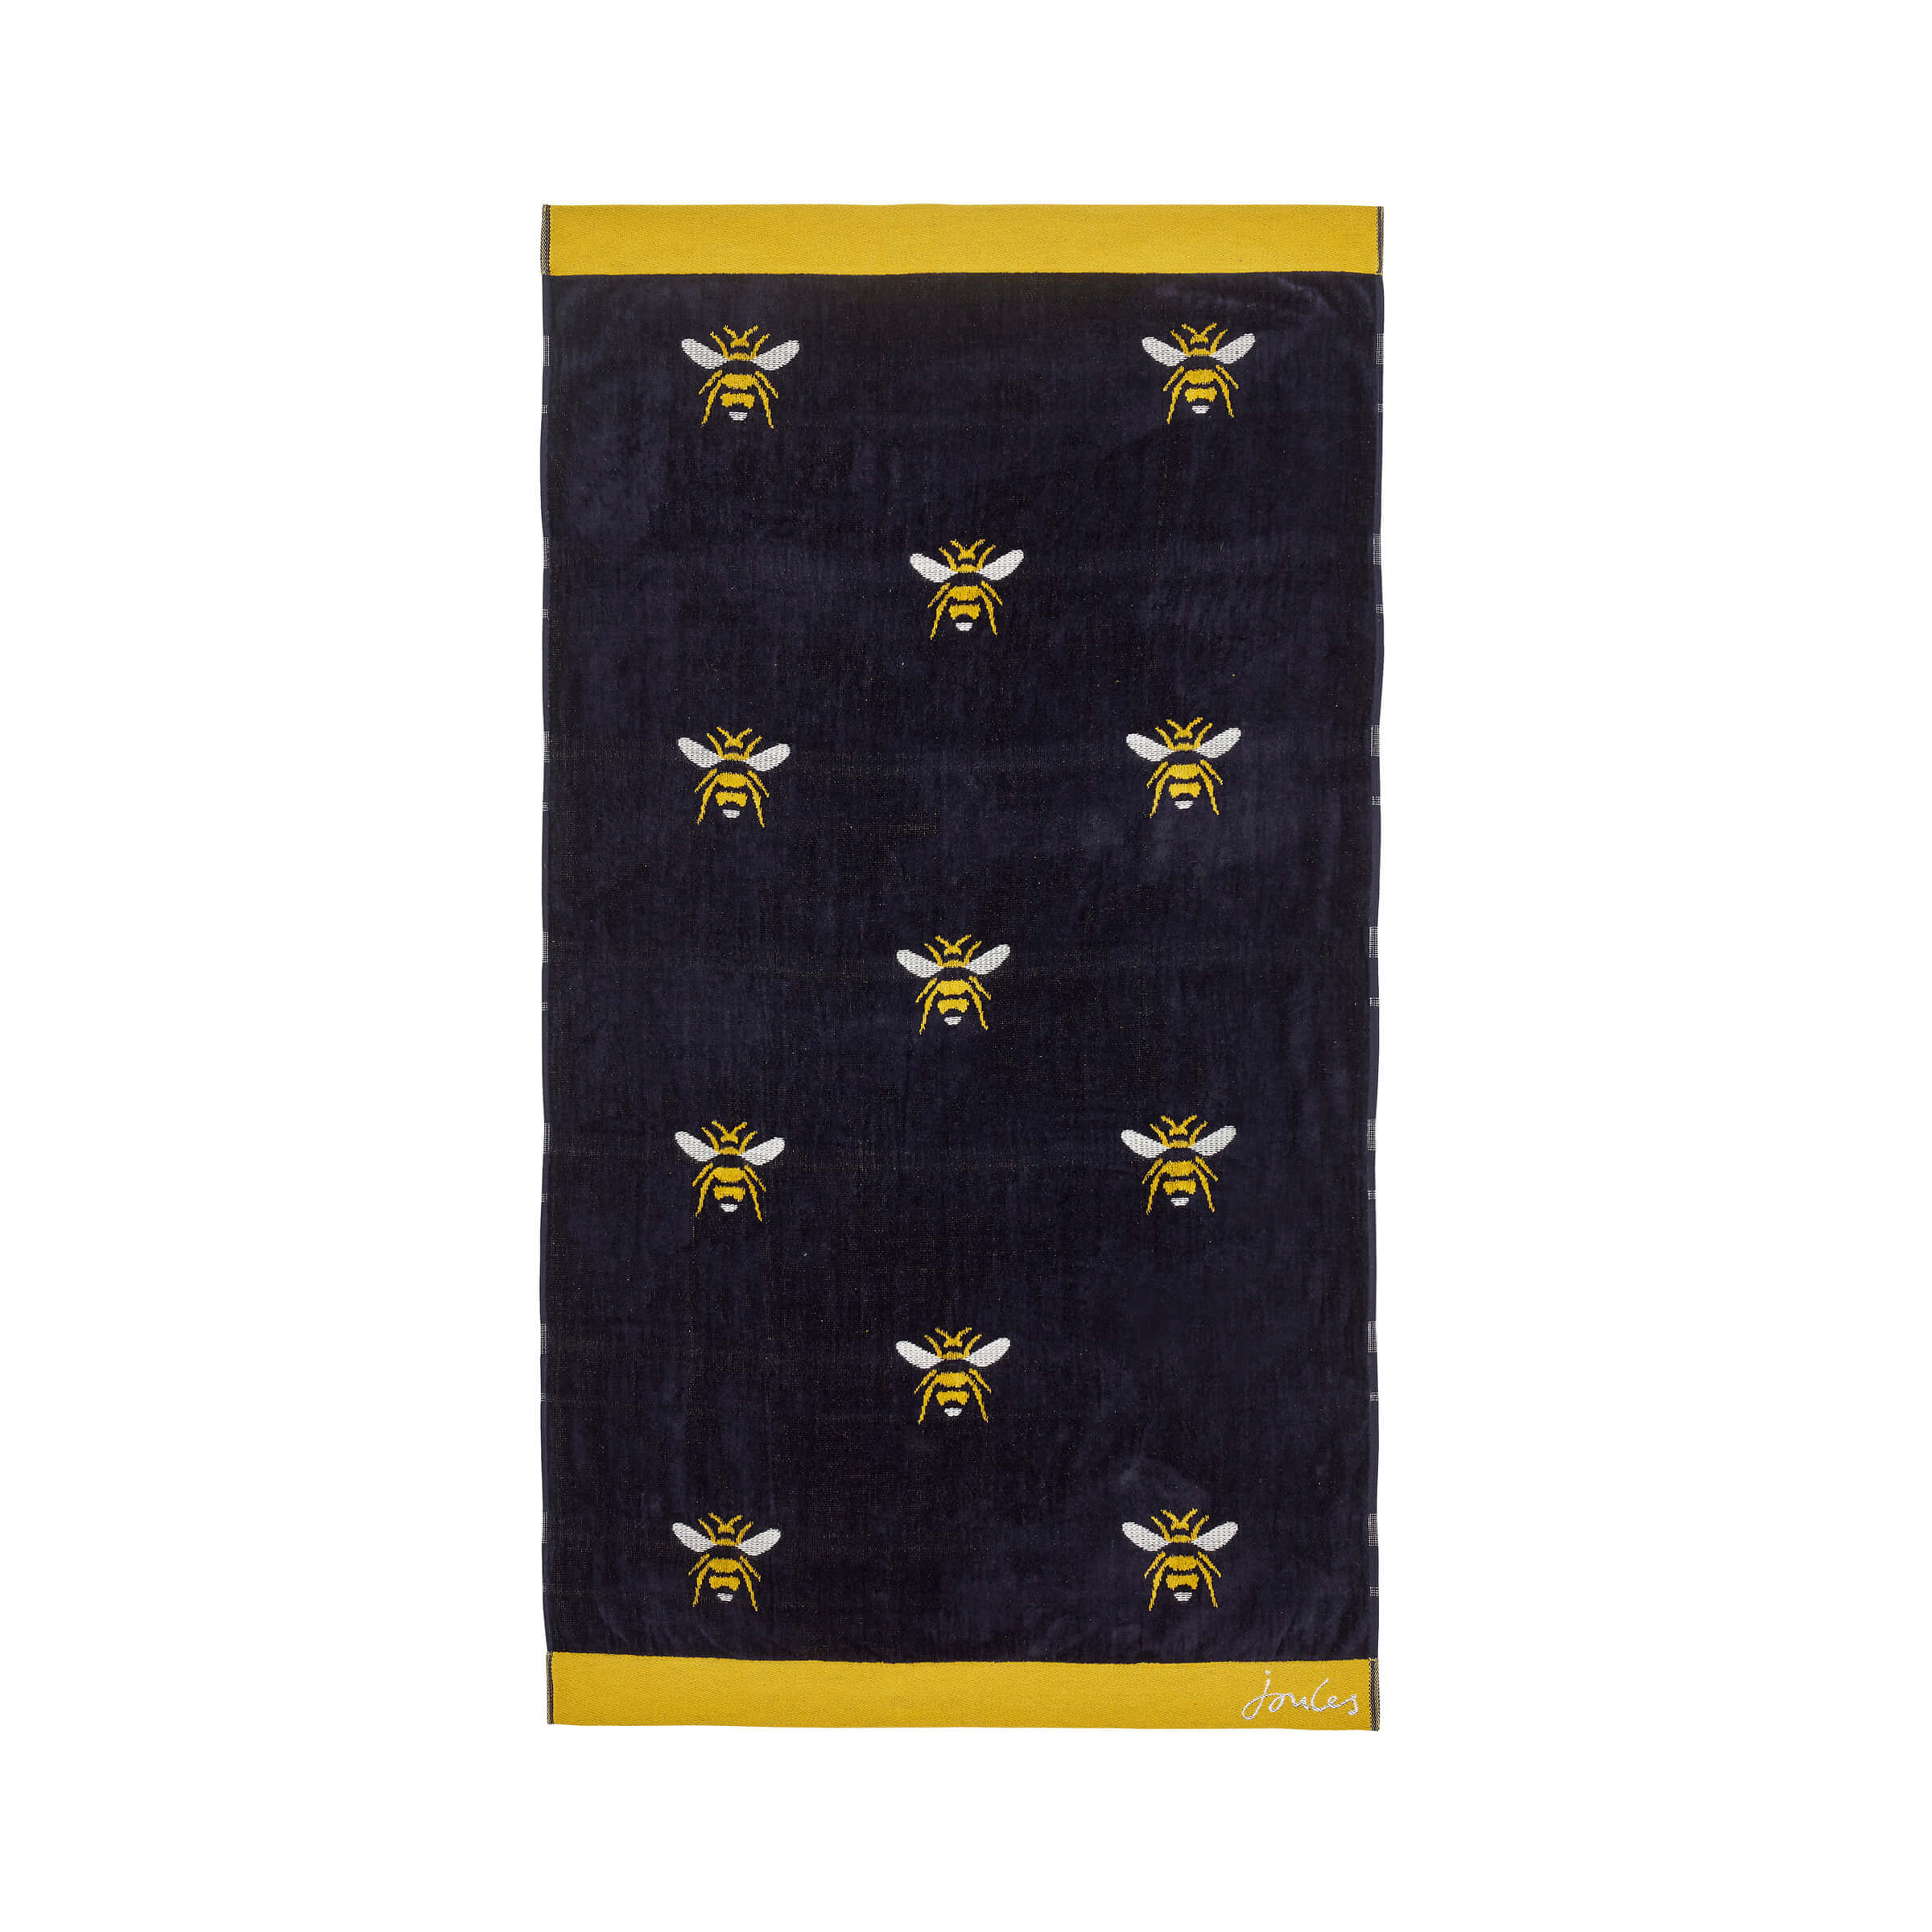 Joules Botanical Bee Bath Towel, French Navy - image 1